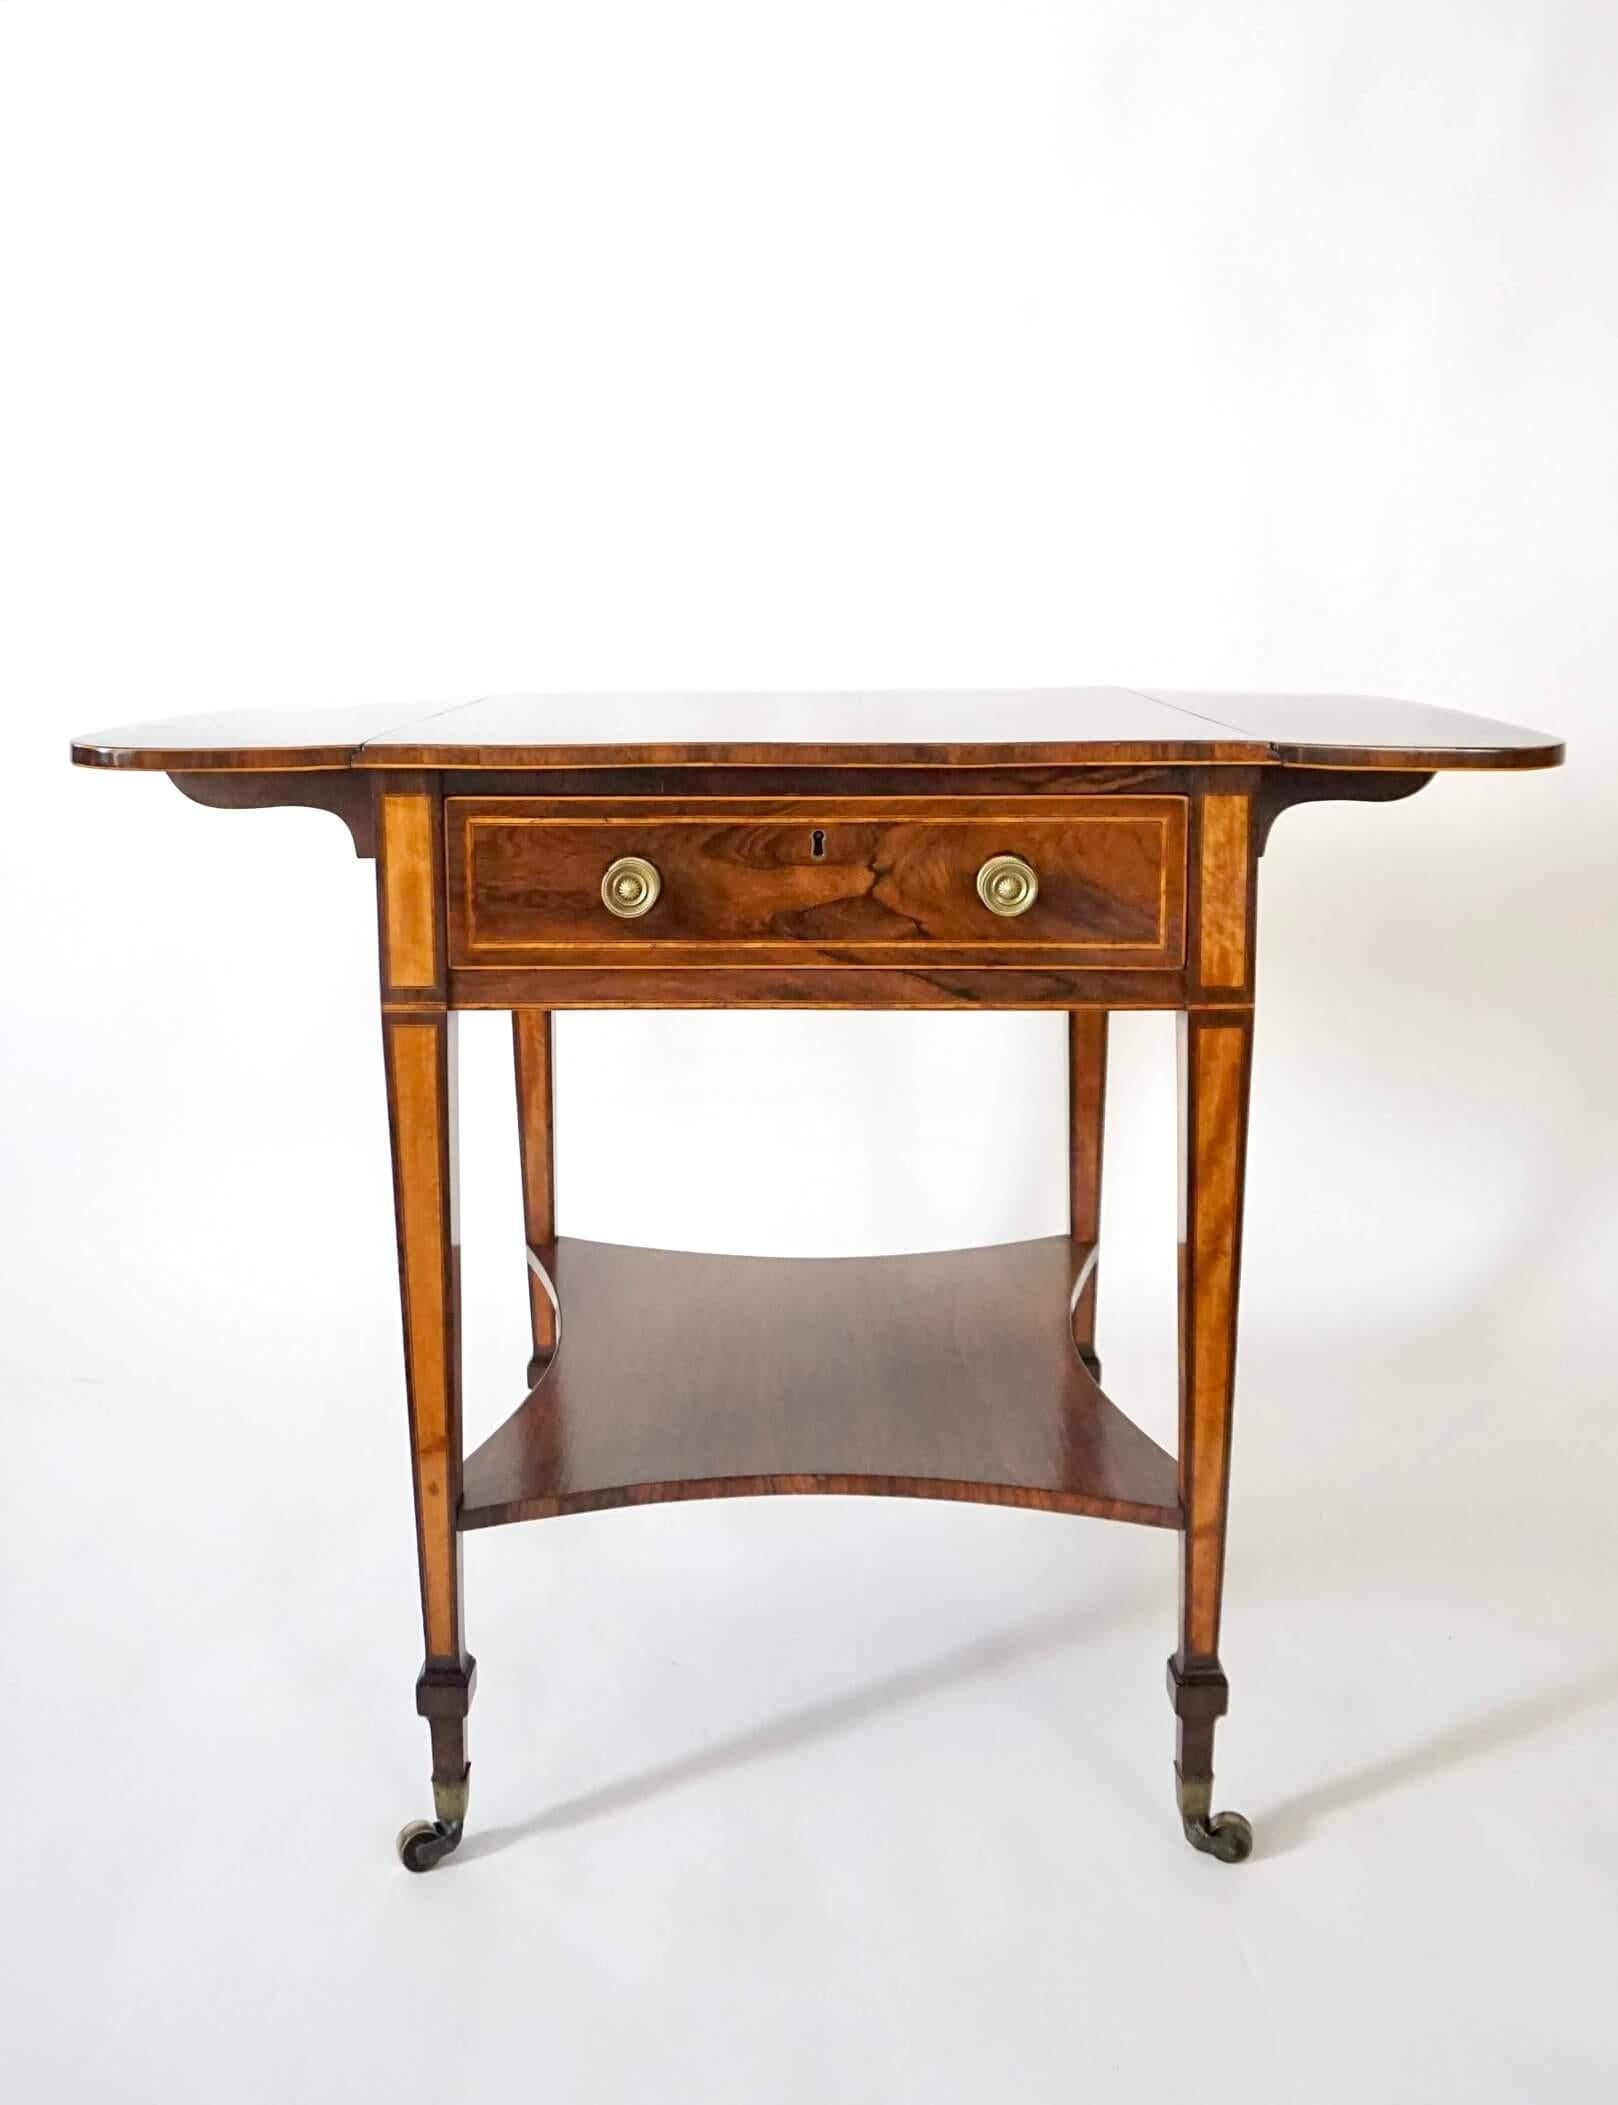 English George III Sheraton Rosewood & Satinwood Pembroke Table, circa 1800 In Good Condition For Sale In Kinderhook, NY